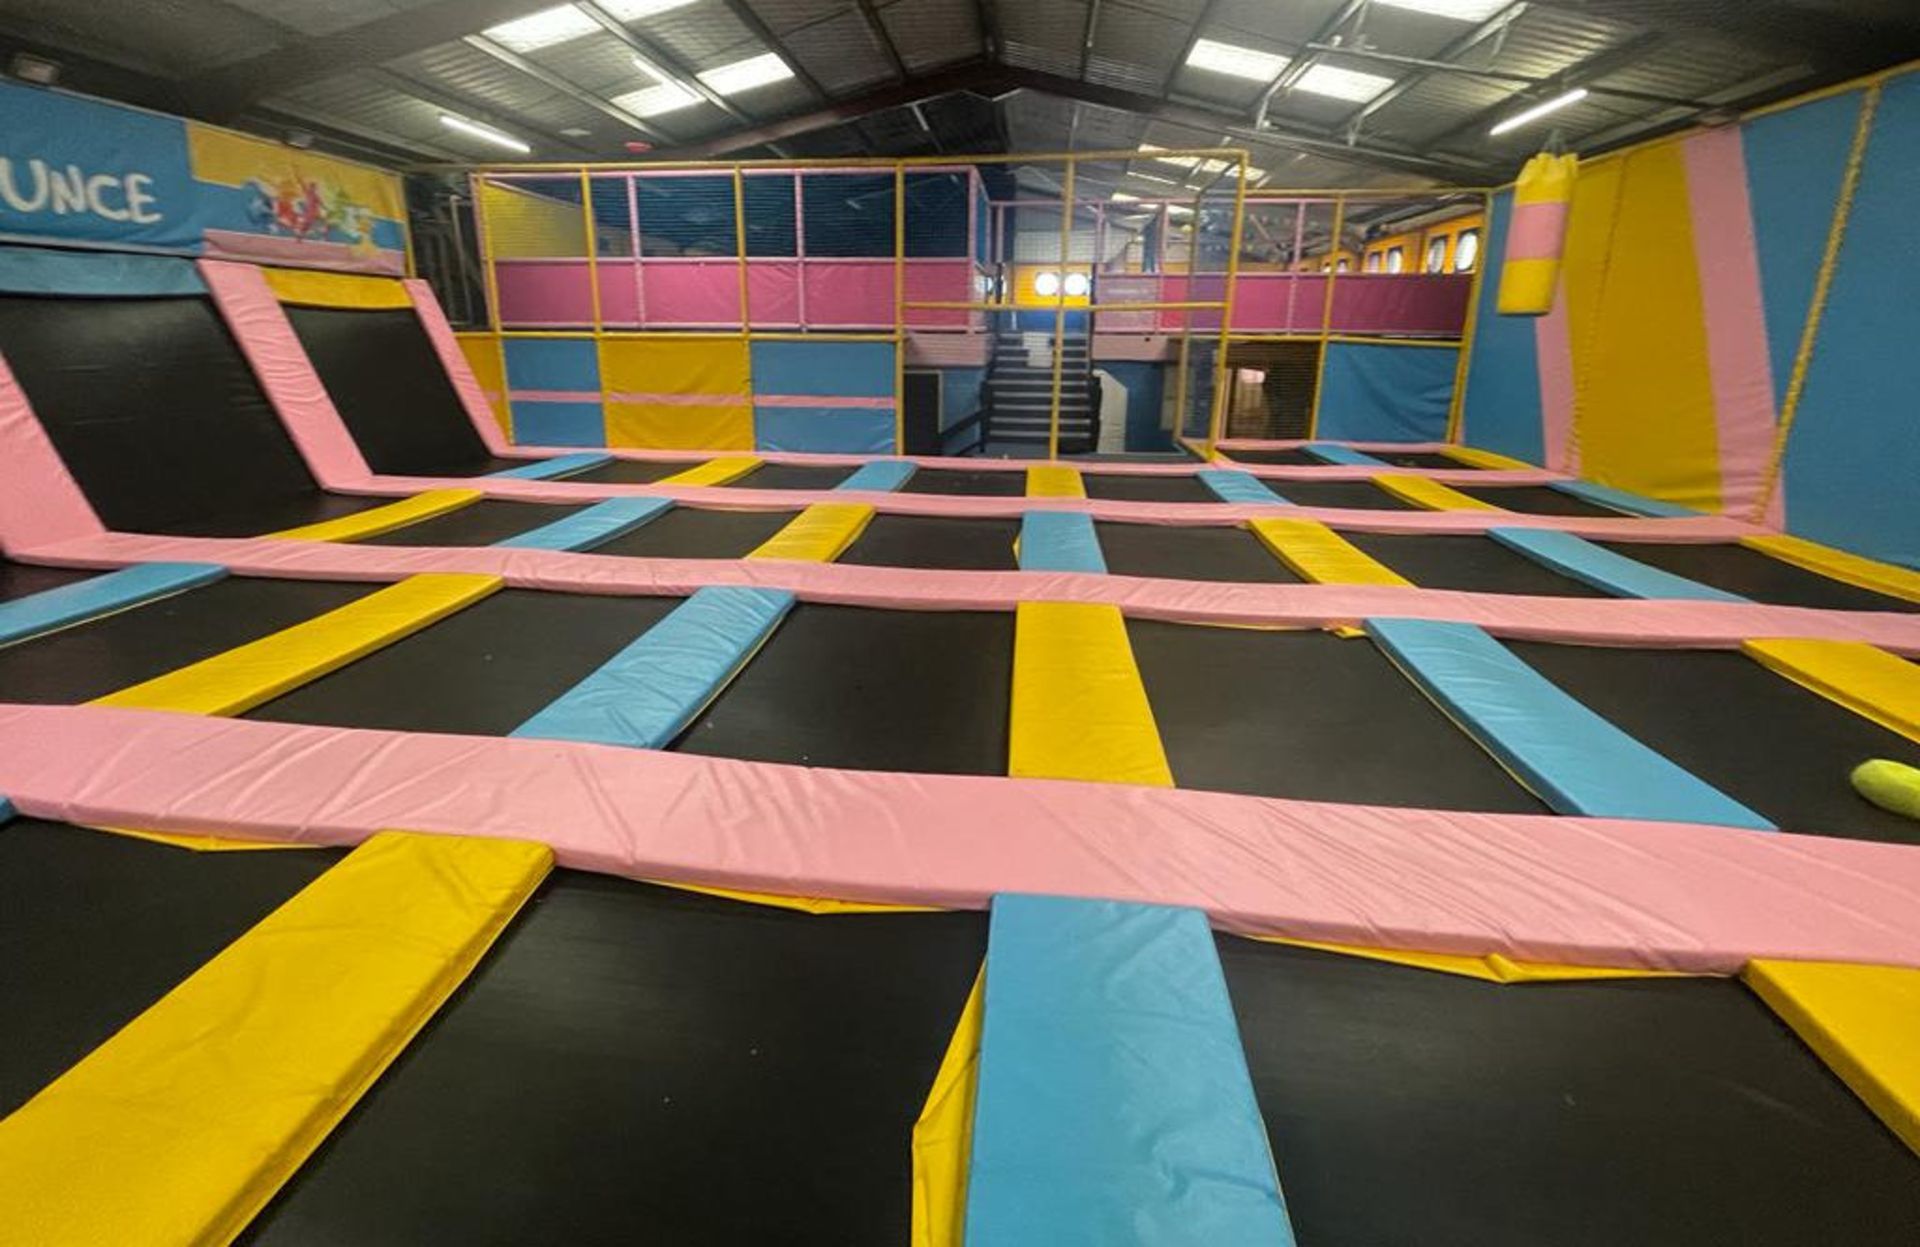 1 x Trampoline Park With Over 40 Interconnected Trampolines, Inflatable Activity Area, Waiting - Image 89 of 99